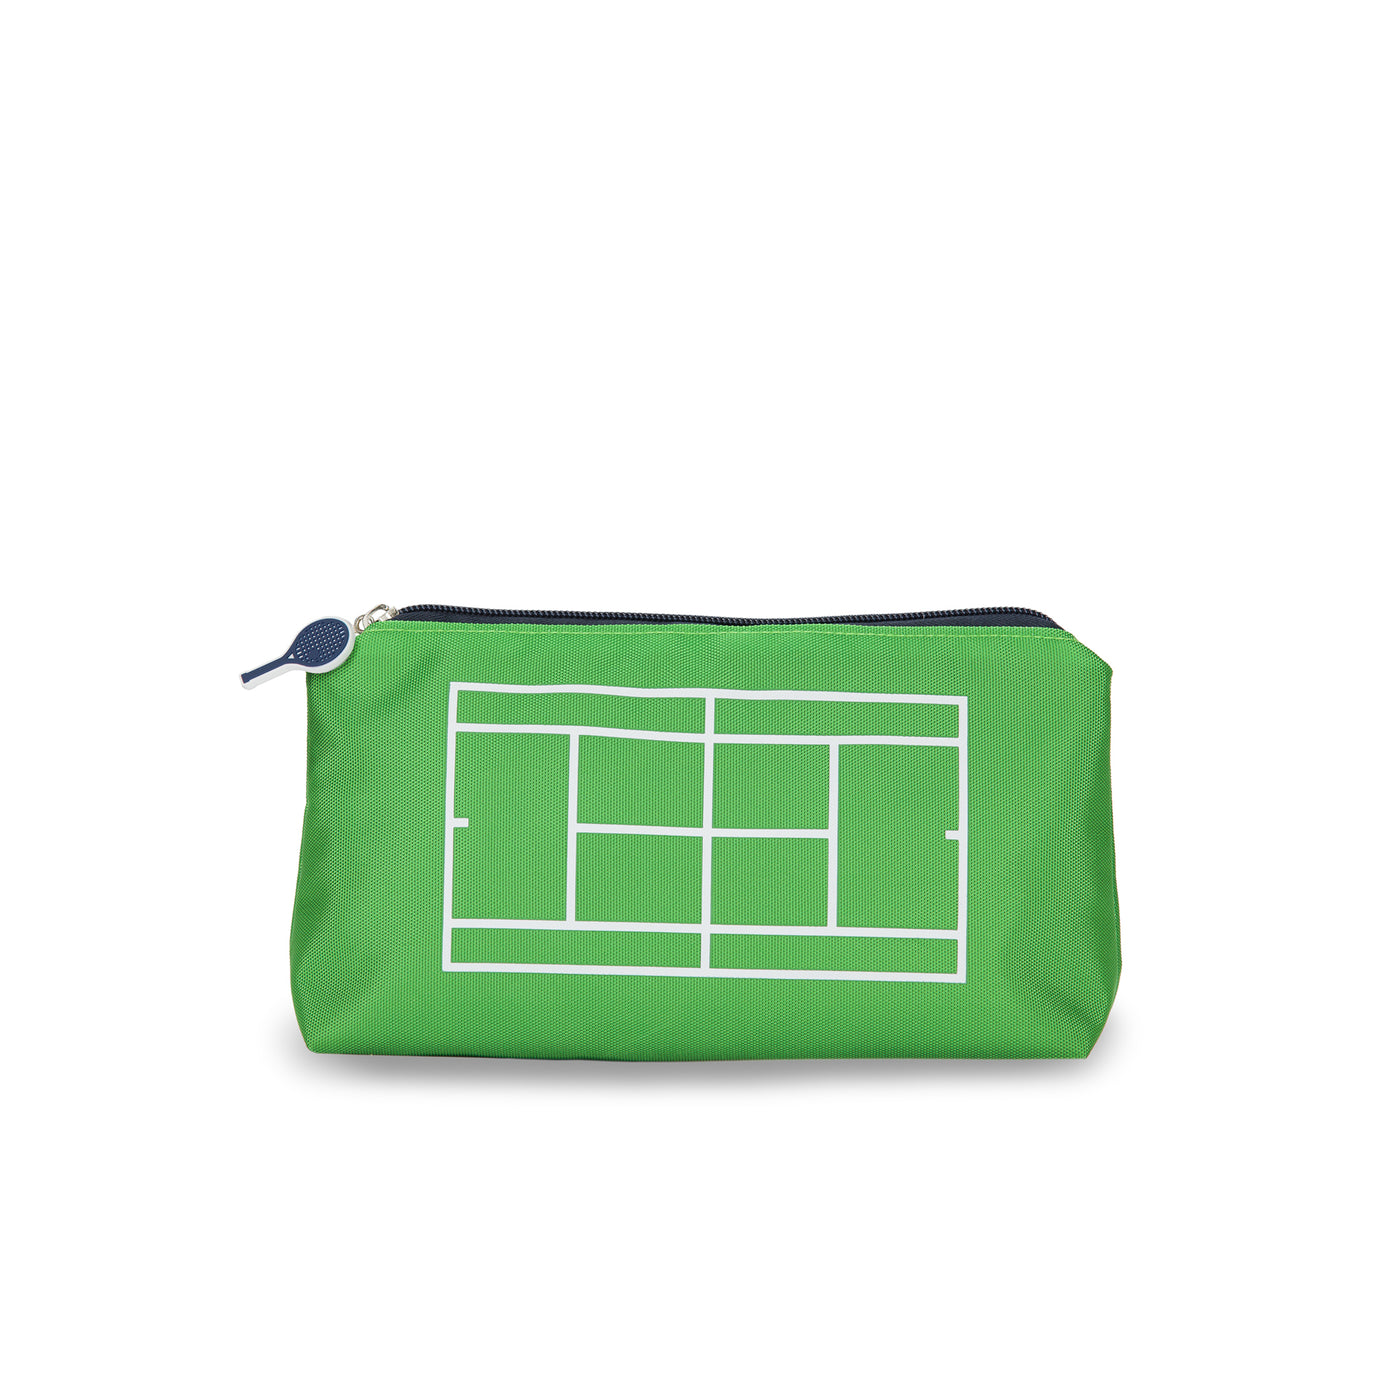 Front view of everyday pouch. Pouch in grass green with navy zipper and white tennis court lines on the front of the pouch. There is a navy and white tennis racquet for a zipper pull.